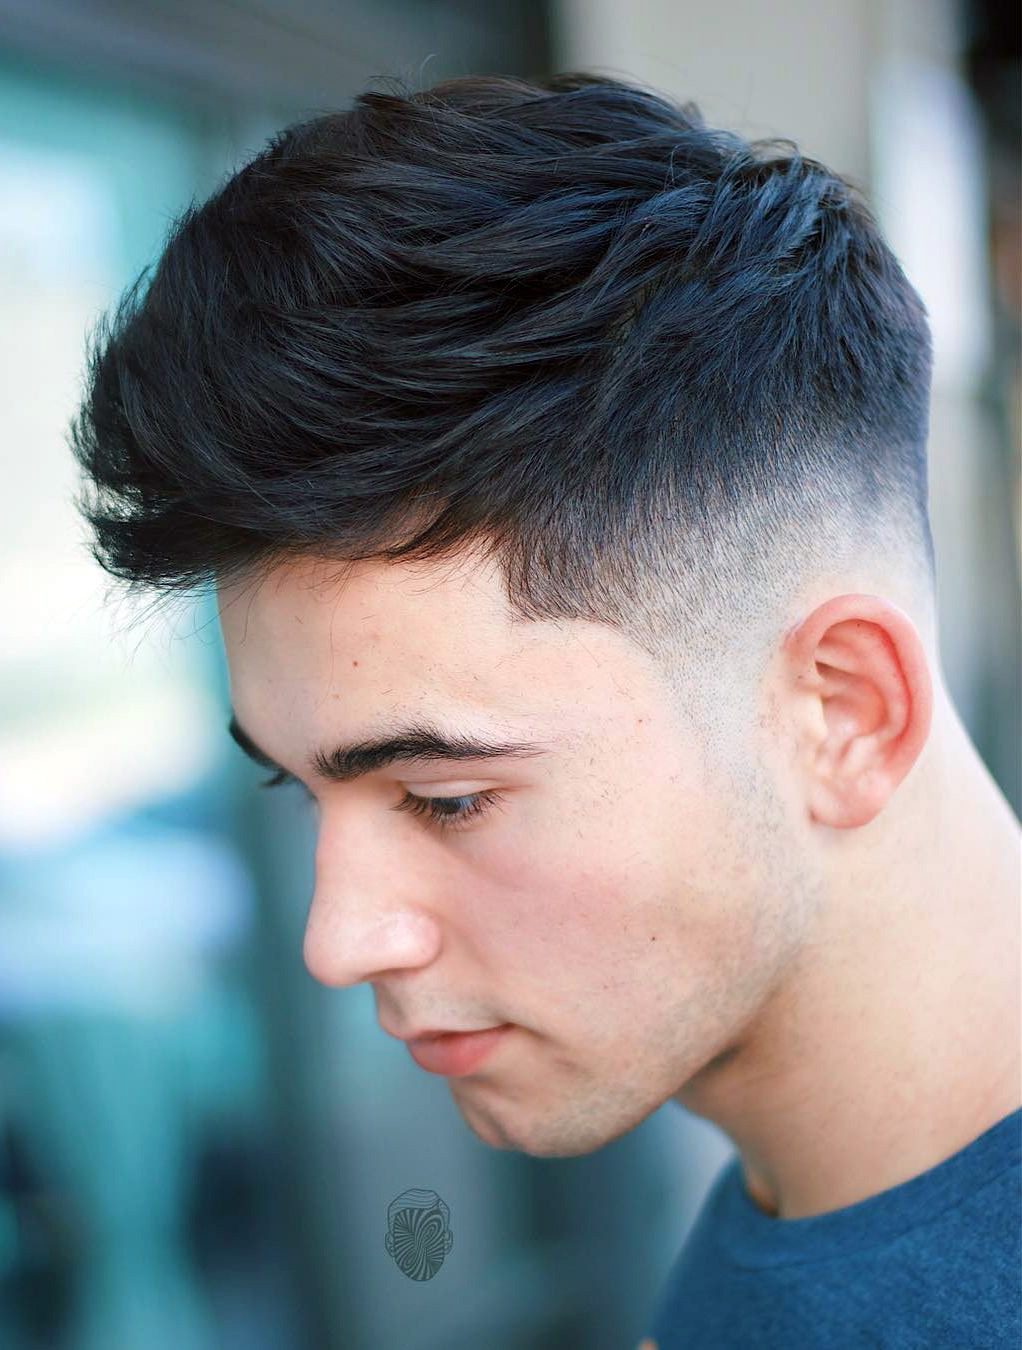 101 Best Hairstyles For Teenage Boys The Ultimate Guide 2021 The most popular hairstyles for boys are going to announce today, todays, we're gonna share top 25 best hairstyles boys your hairstyles represented your personality so don't be lazy about your hair. 101 best hairstyles for teenage boys